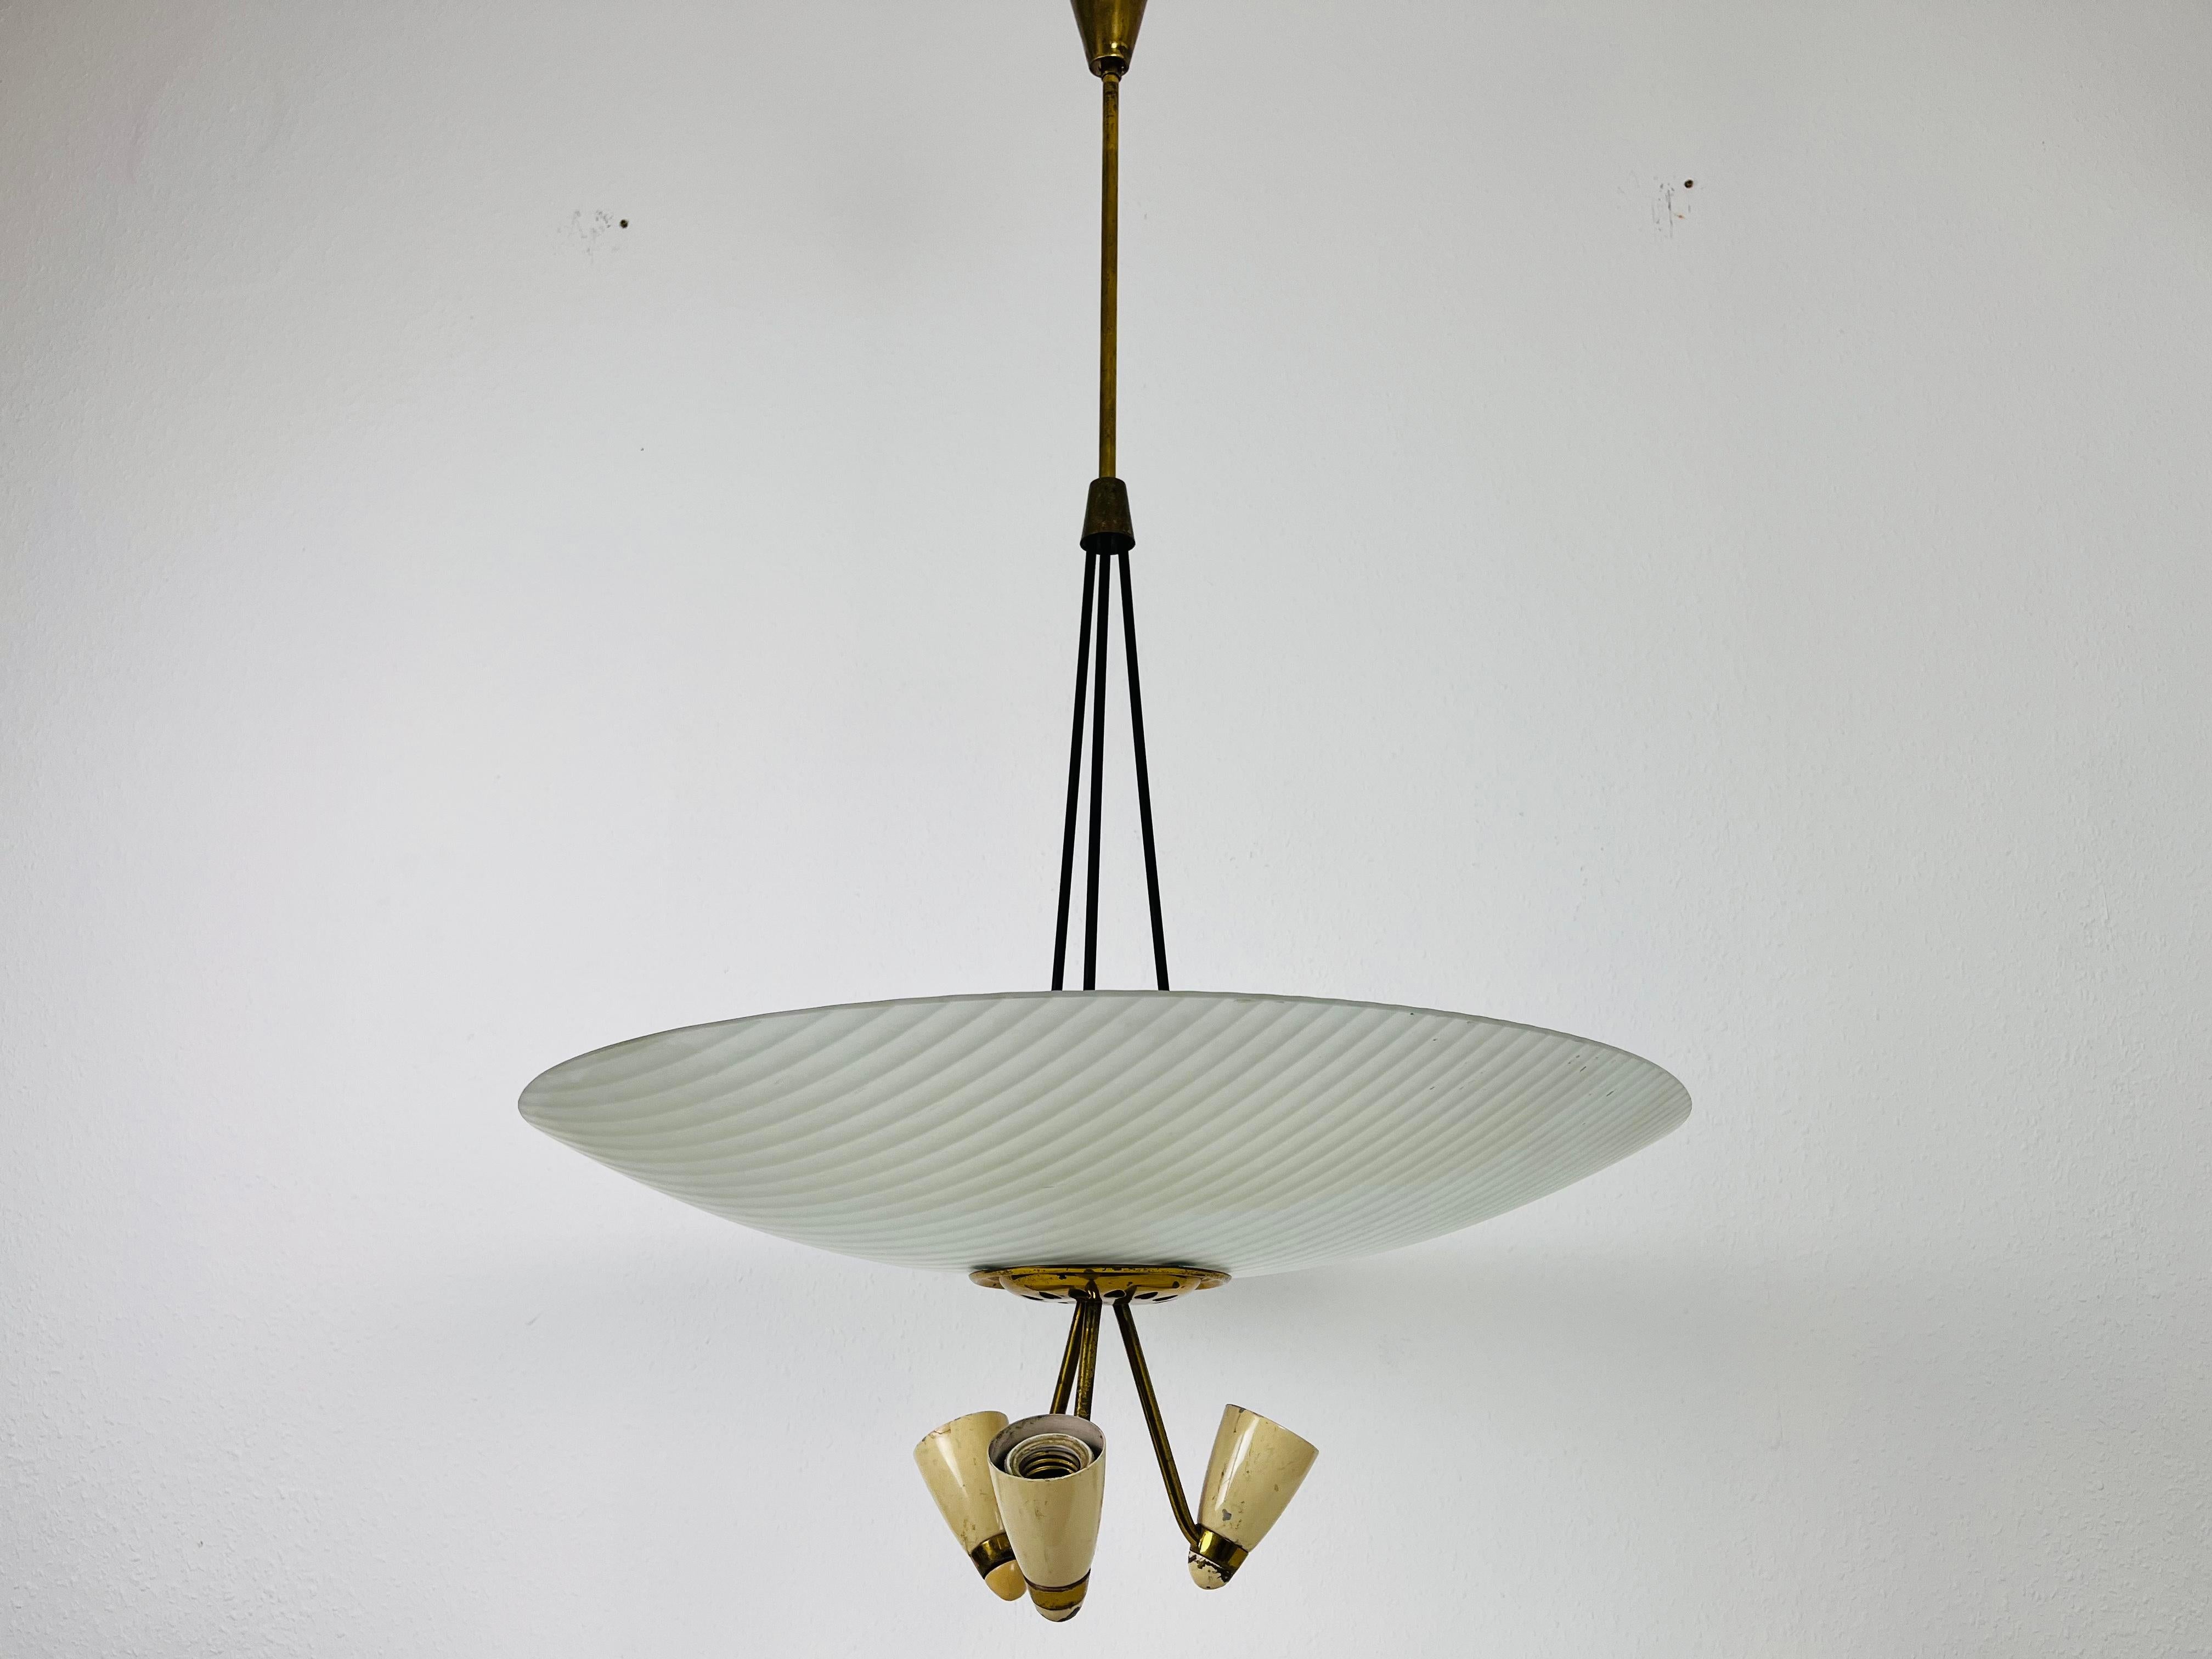 A Sputnik chandelier made in Italy in the 1950s. It is fascinating with its unique saucer shape and wonderful brass elements.

The light requires 3 E27 (US E26) light bulbs under the glass element. Good vintage condition.

Free worldwide express